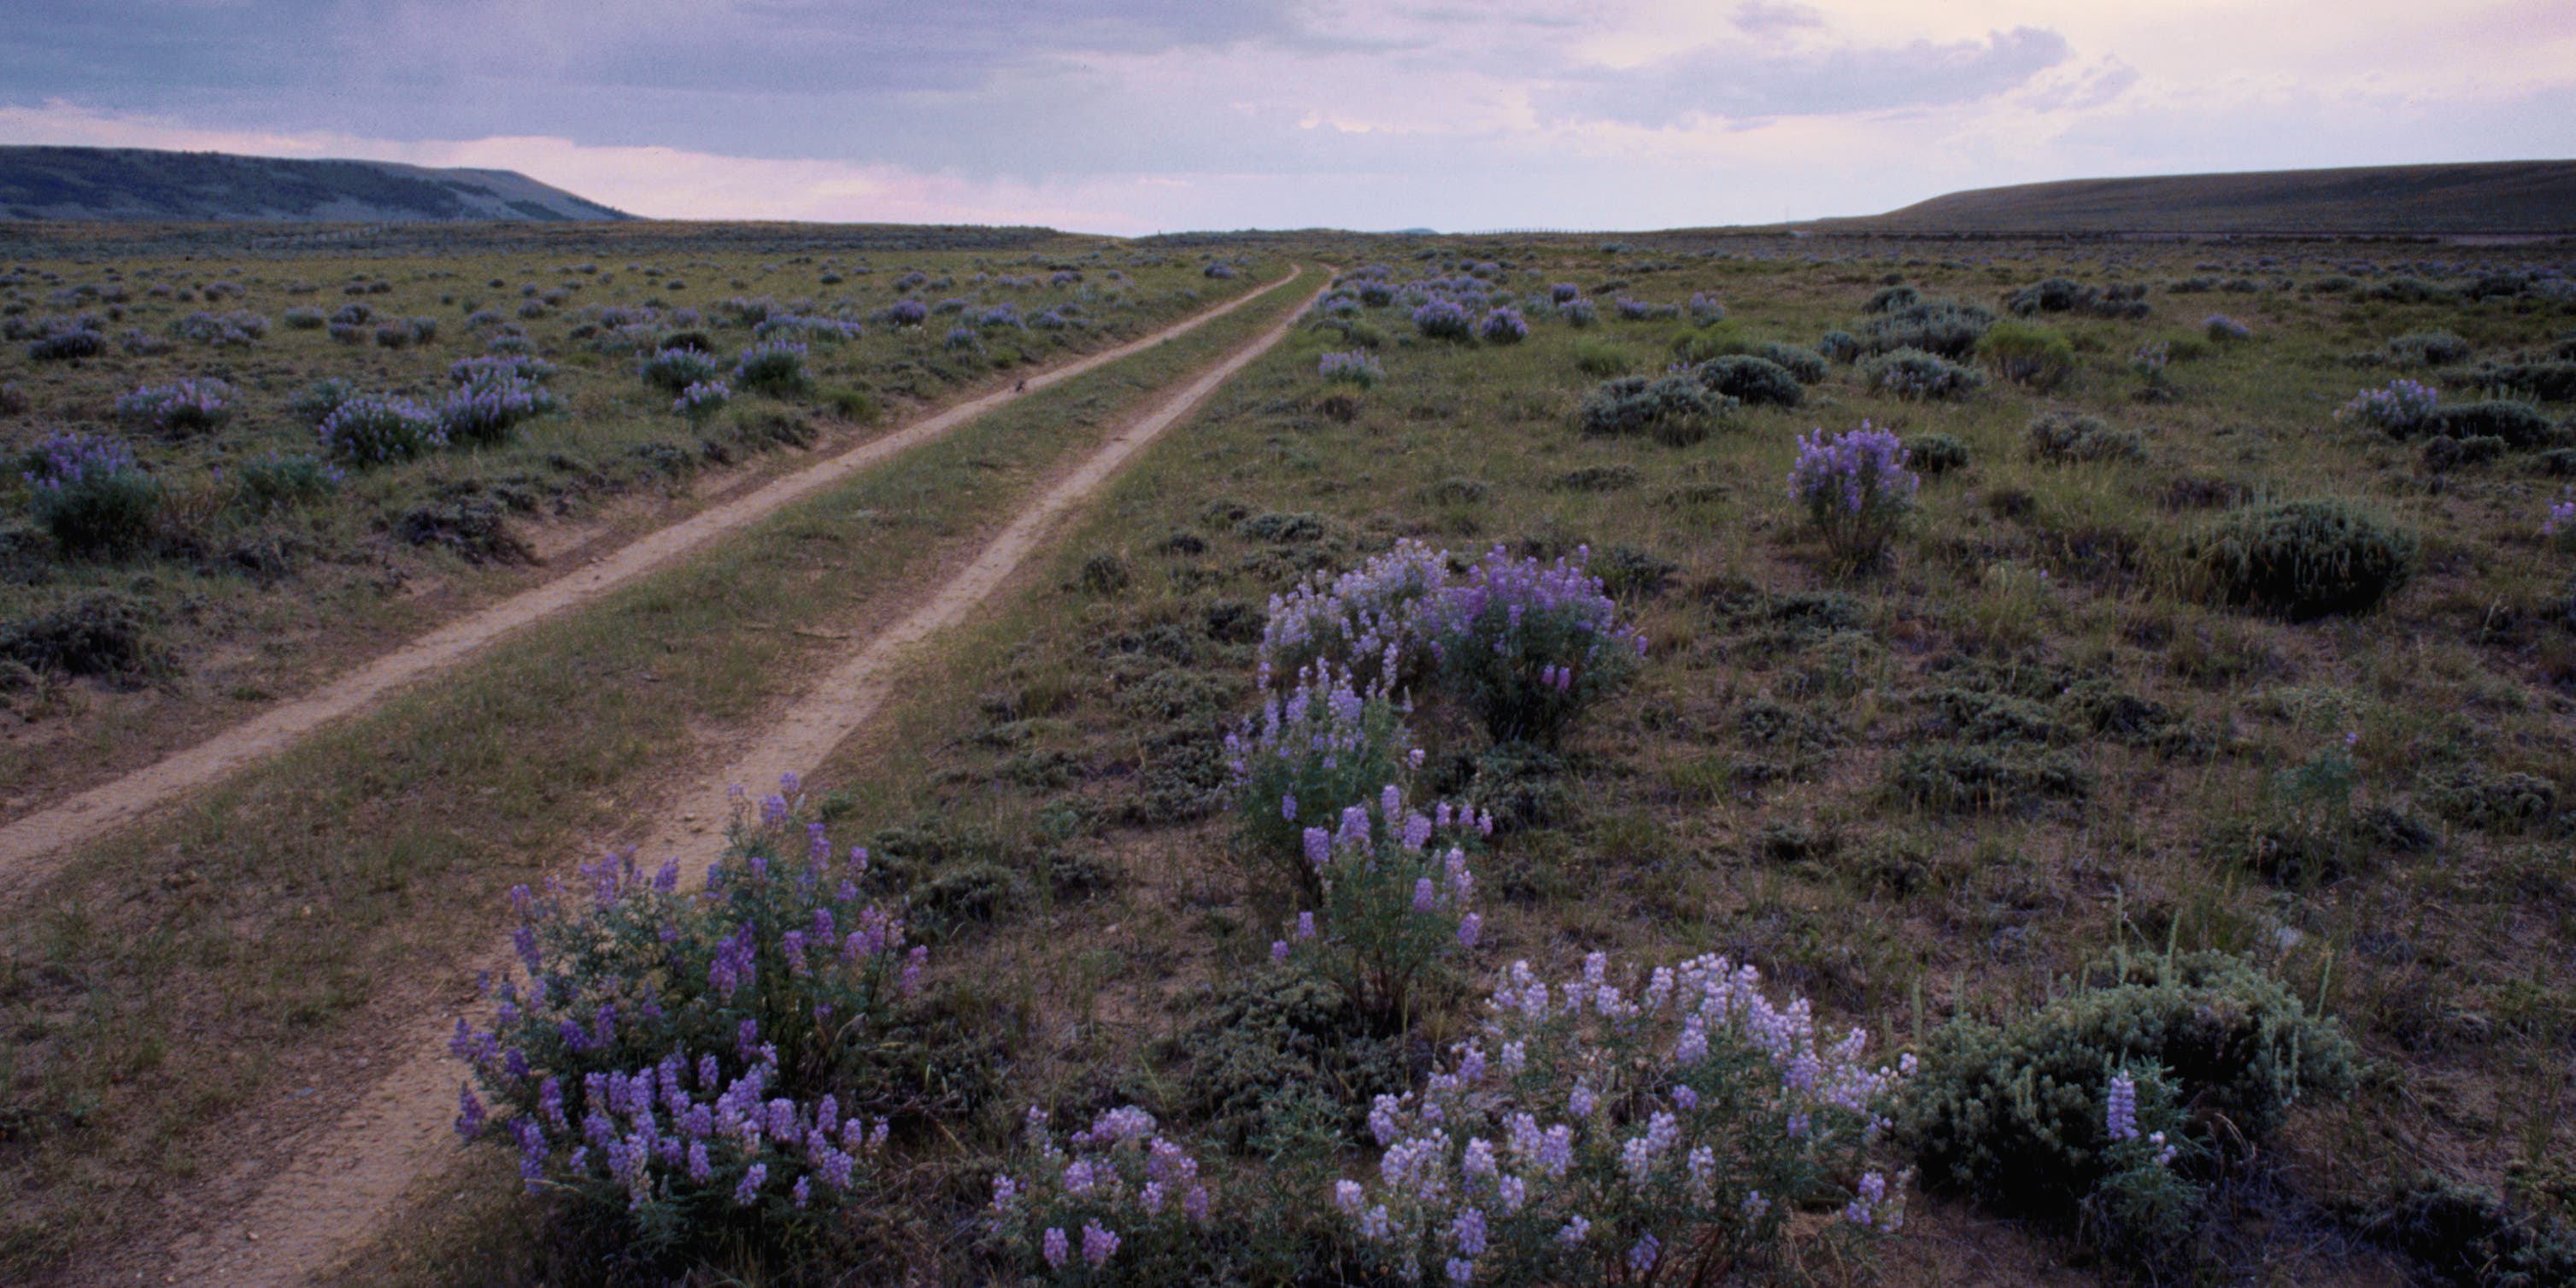 Lupine grows next to wagon wheel ruts made by wagon trains crossing the South Pass on the Oregon Trail. South Pass is the highest point in elevation on the trail.